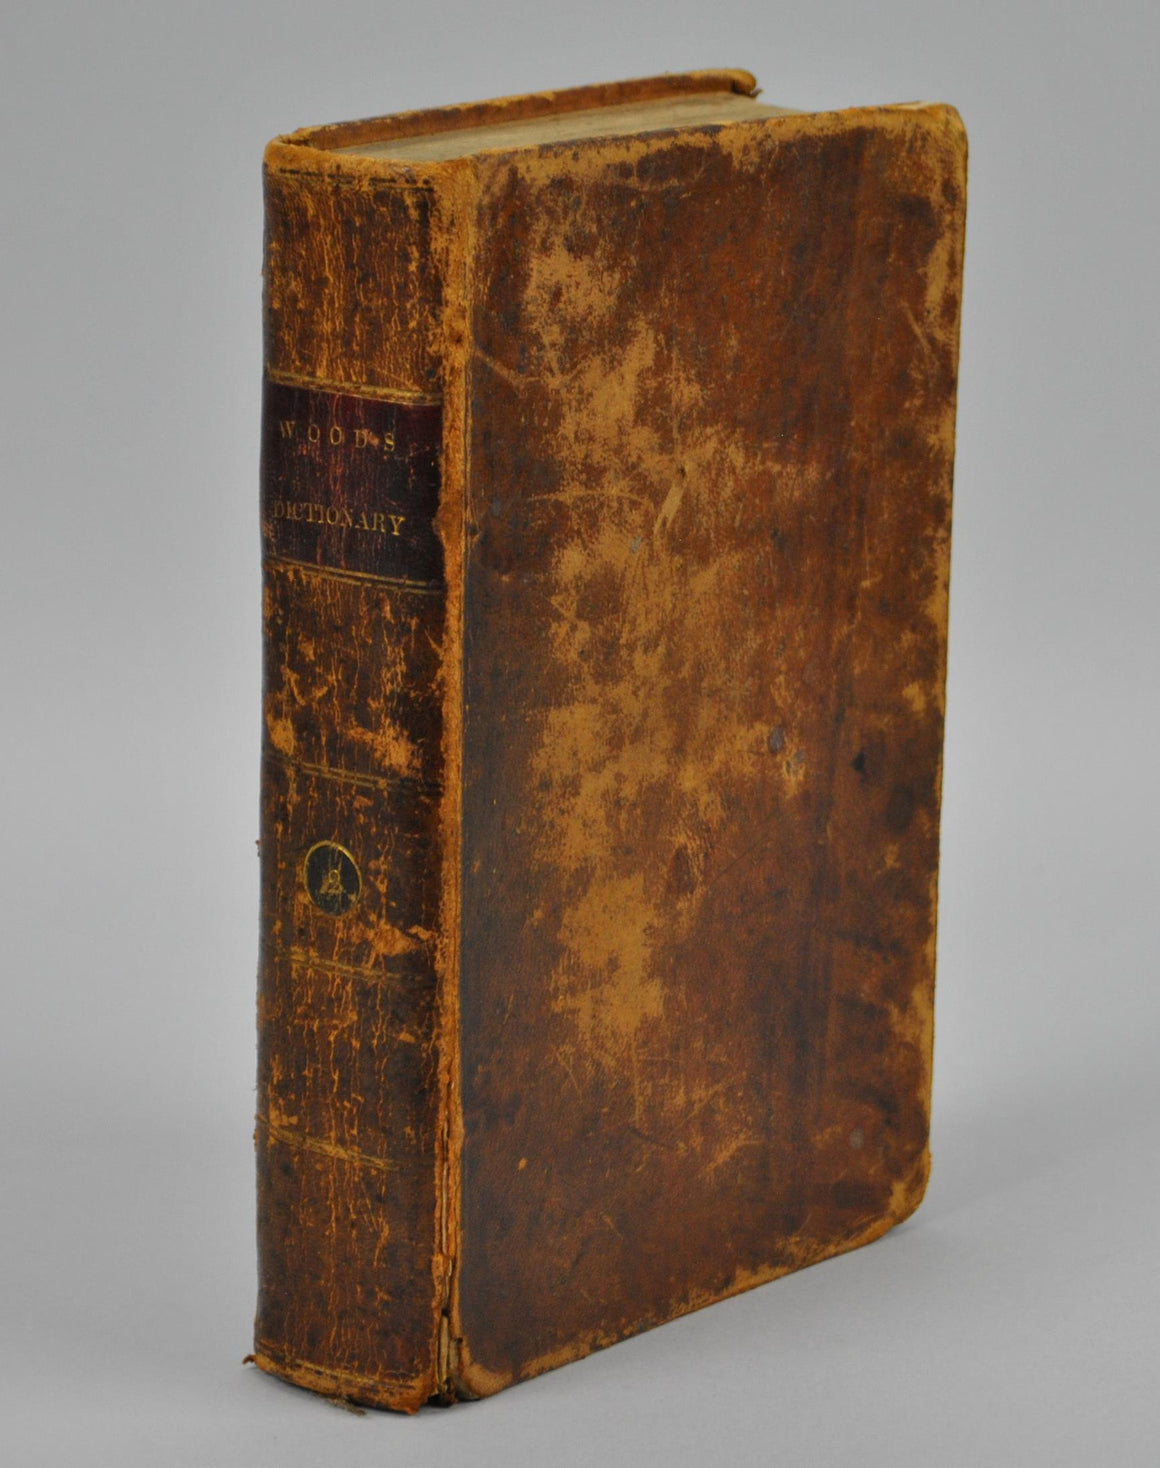 A Dictionary to the Holy Bible Vol II by James Wood 1813